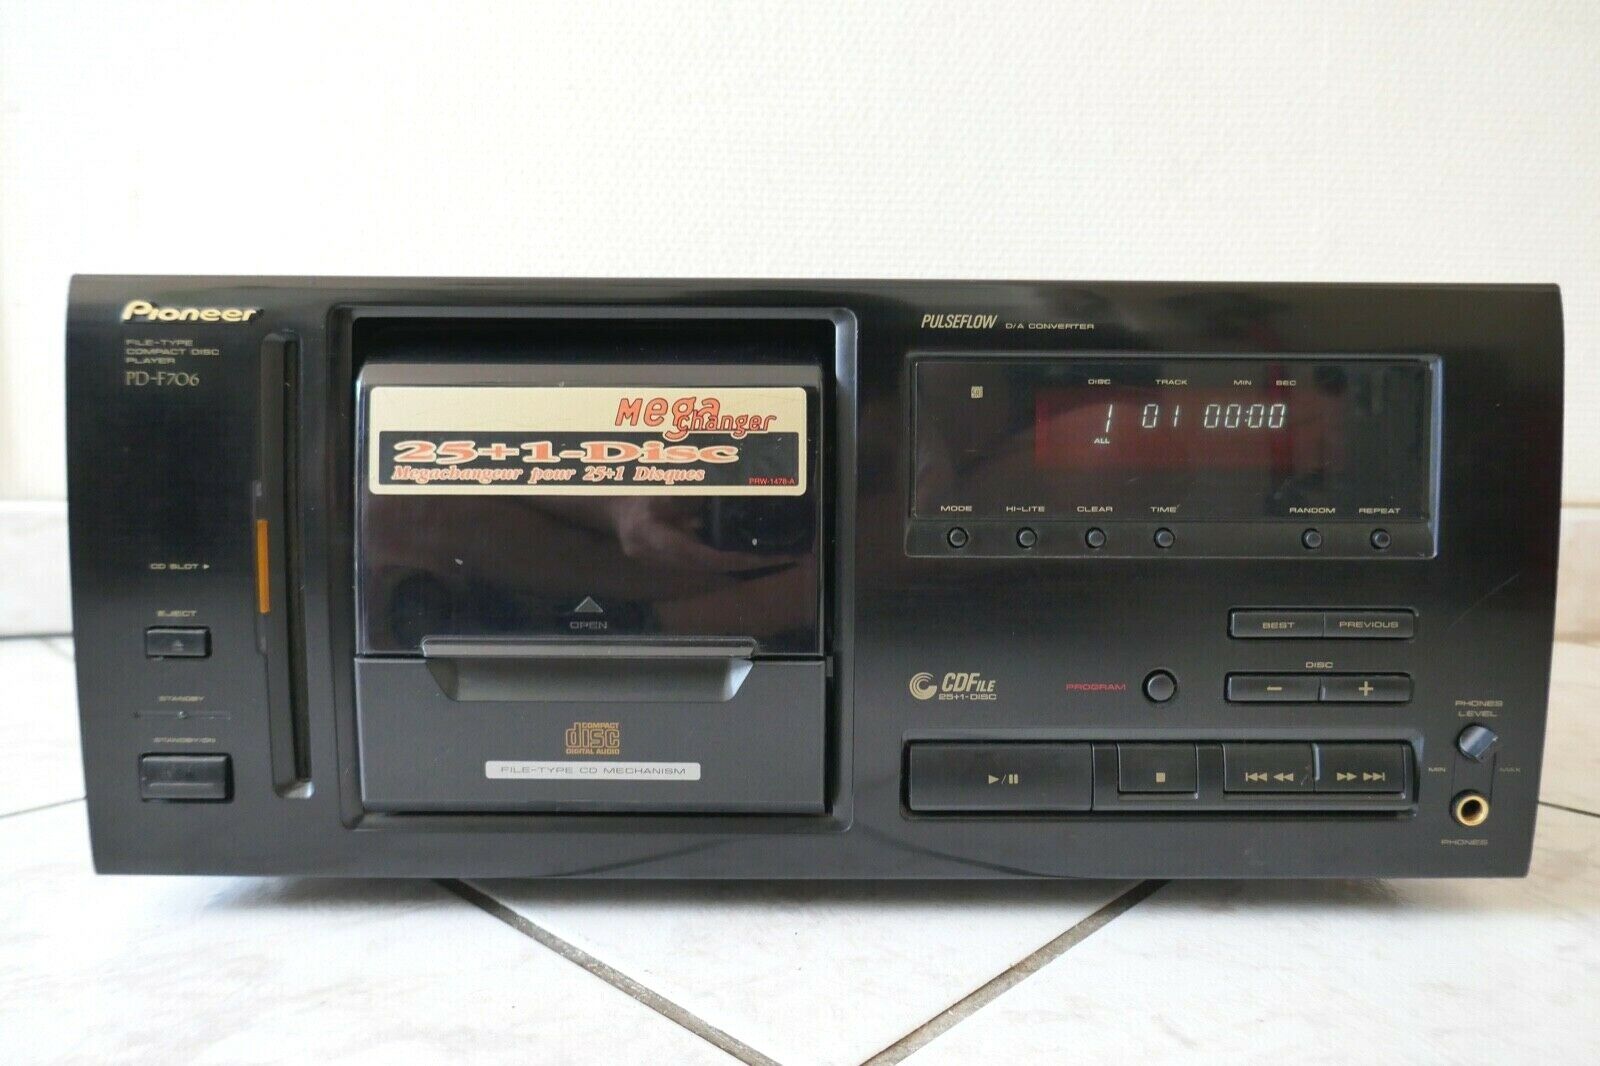 lecteur compact disc player pioneer PD-F706 vintage occasion